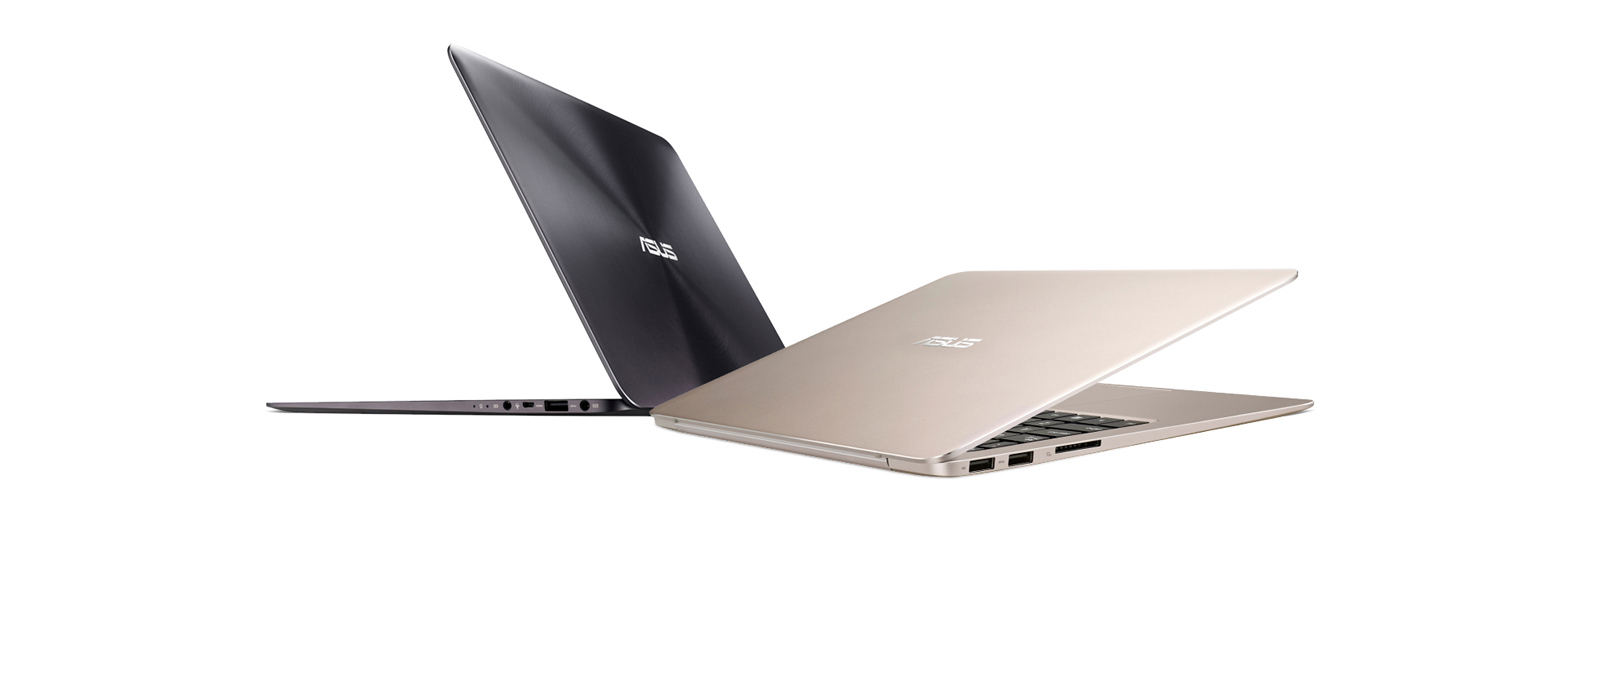 Asus-UX305UA-with-QHD+-display-alongwith-Core-i7-processor-and-8GB-RAM